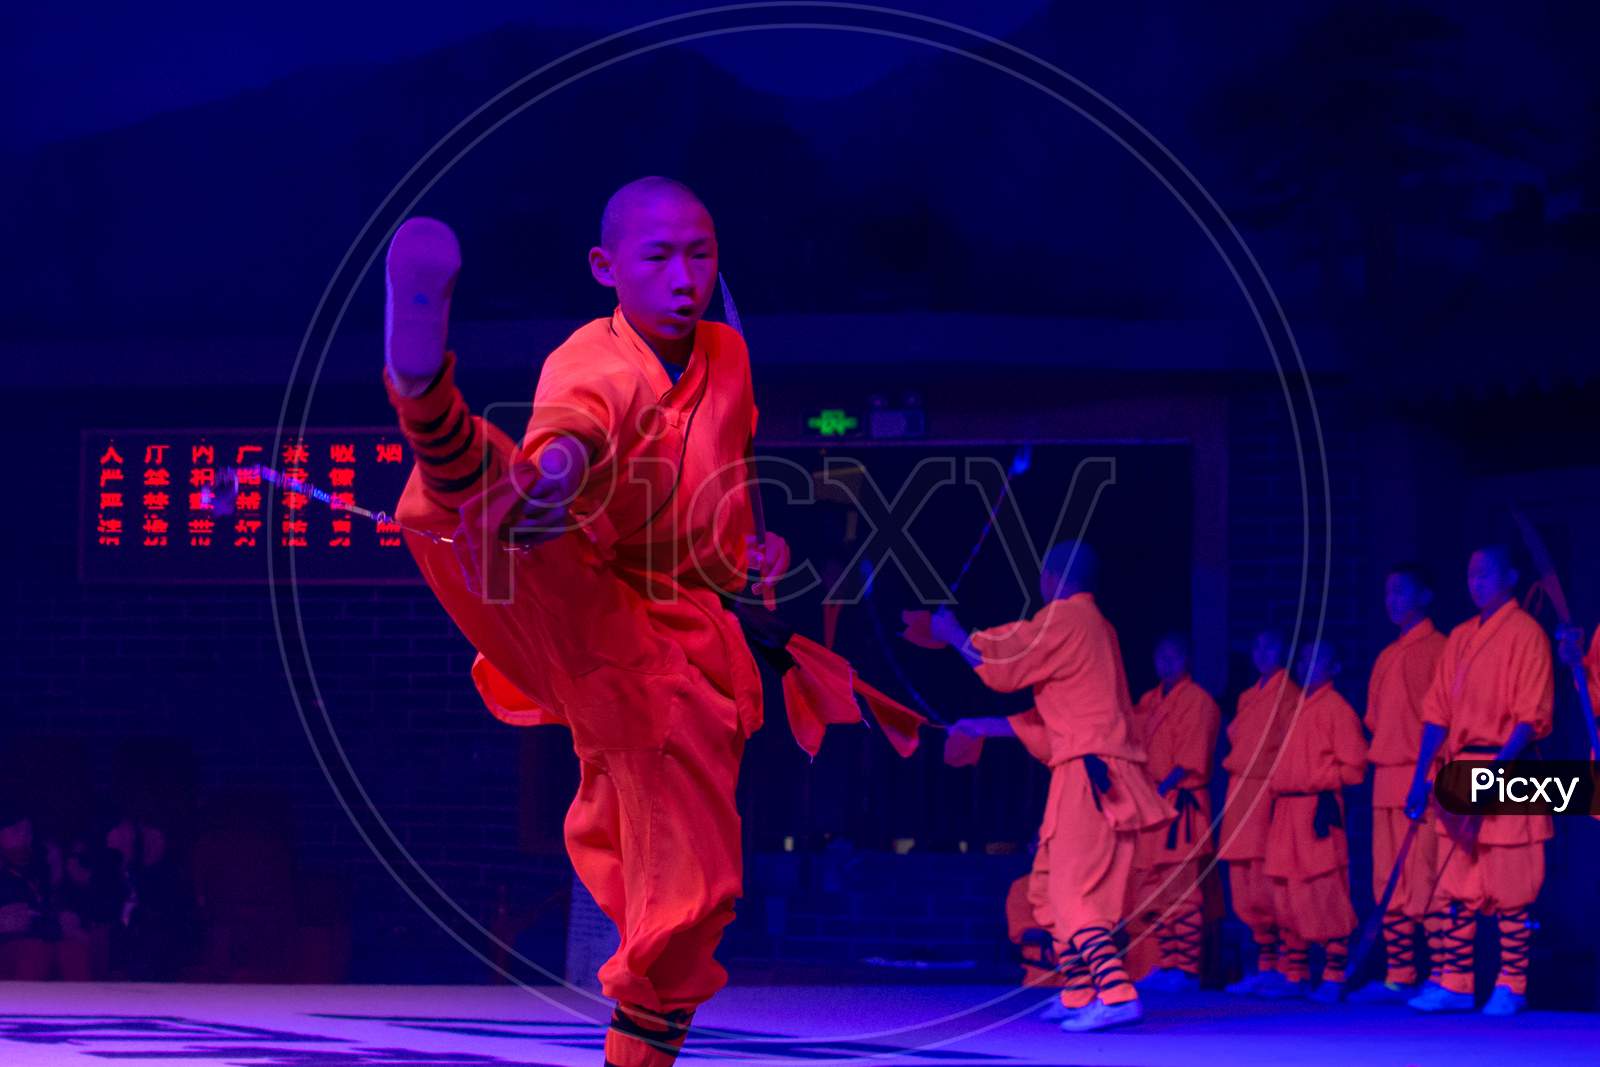 Shaolin Kung Fu Demonstration By Young Apprentices At The Shaolin Temple